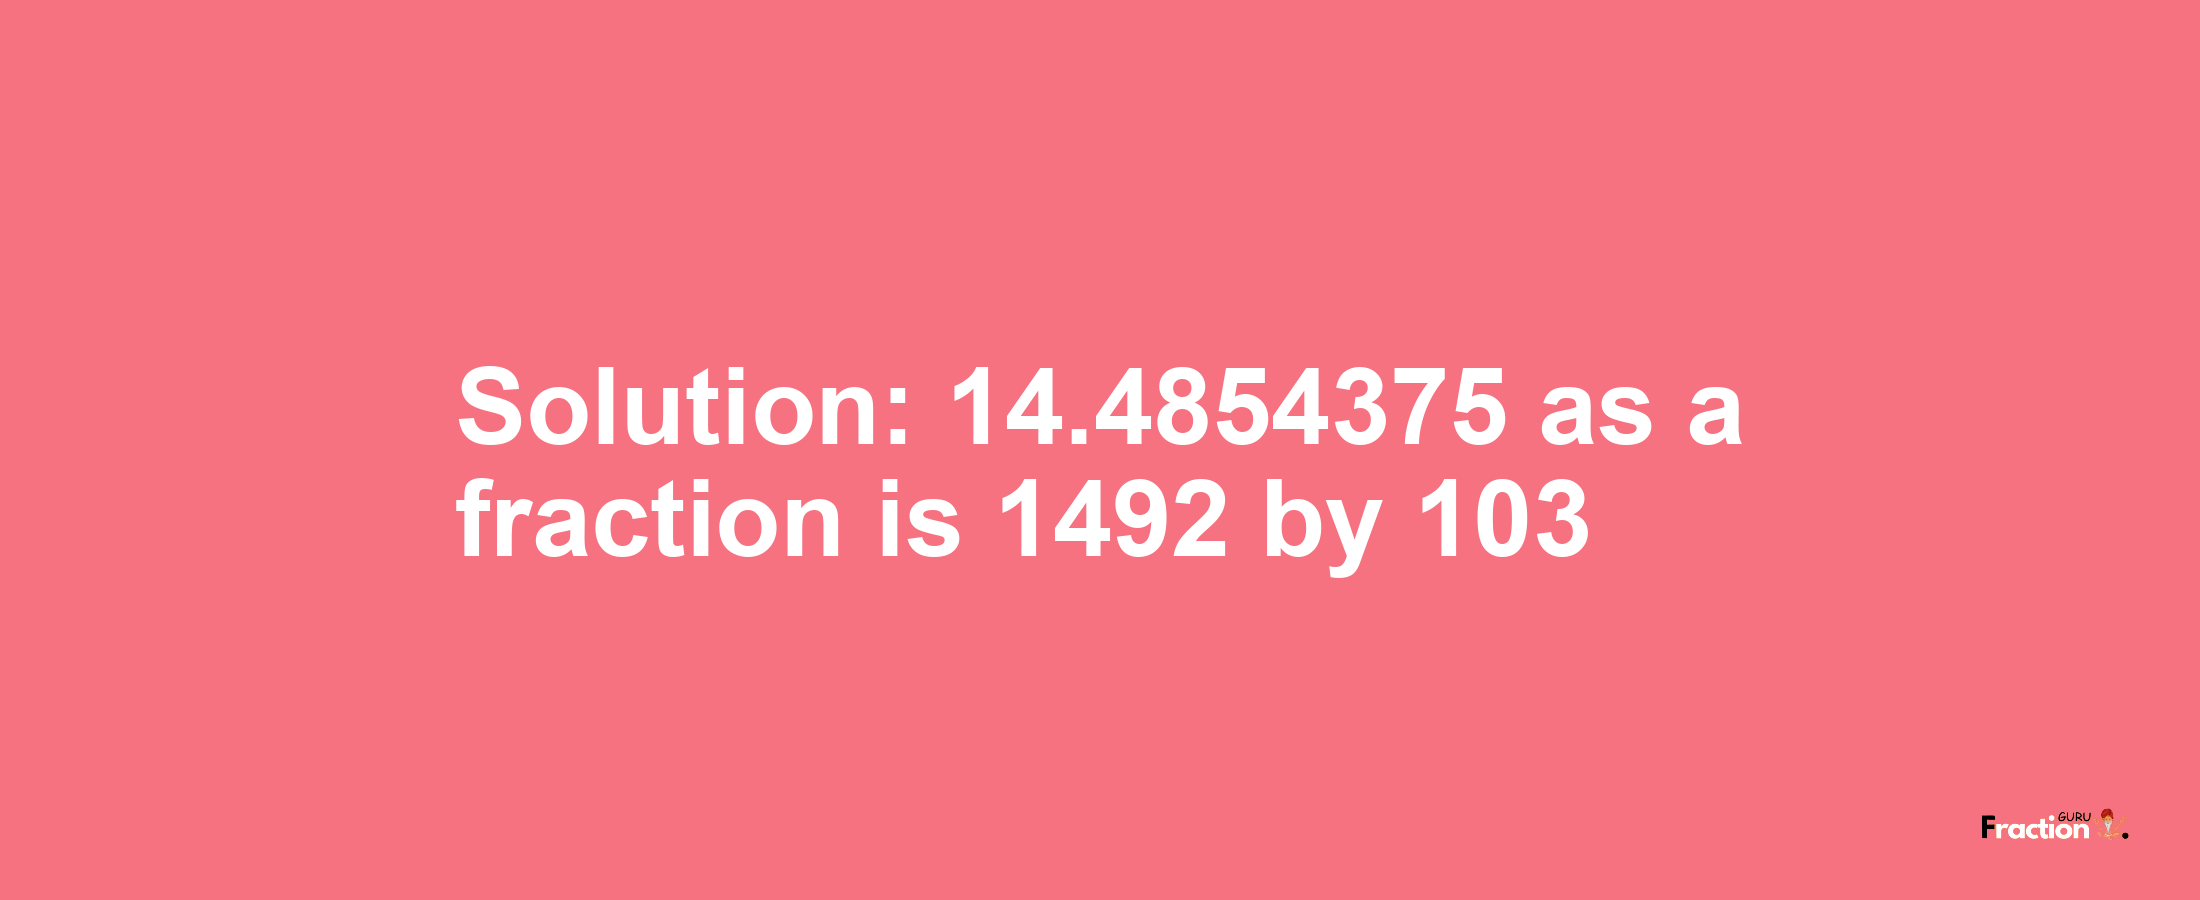 Solution:14.4854375 as a fraction is 1492/103